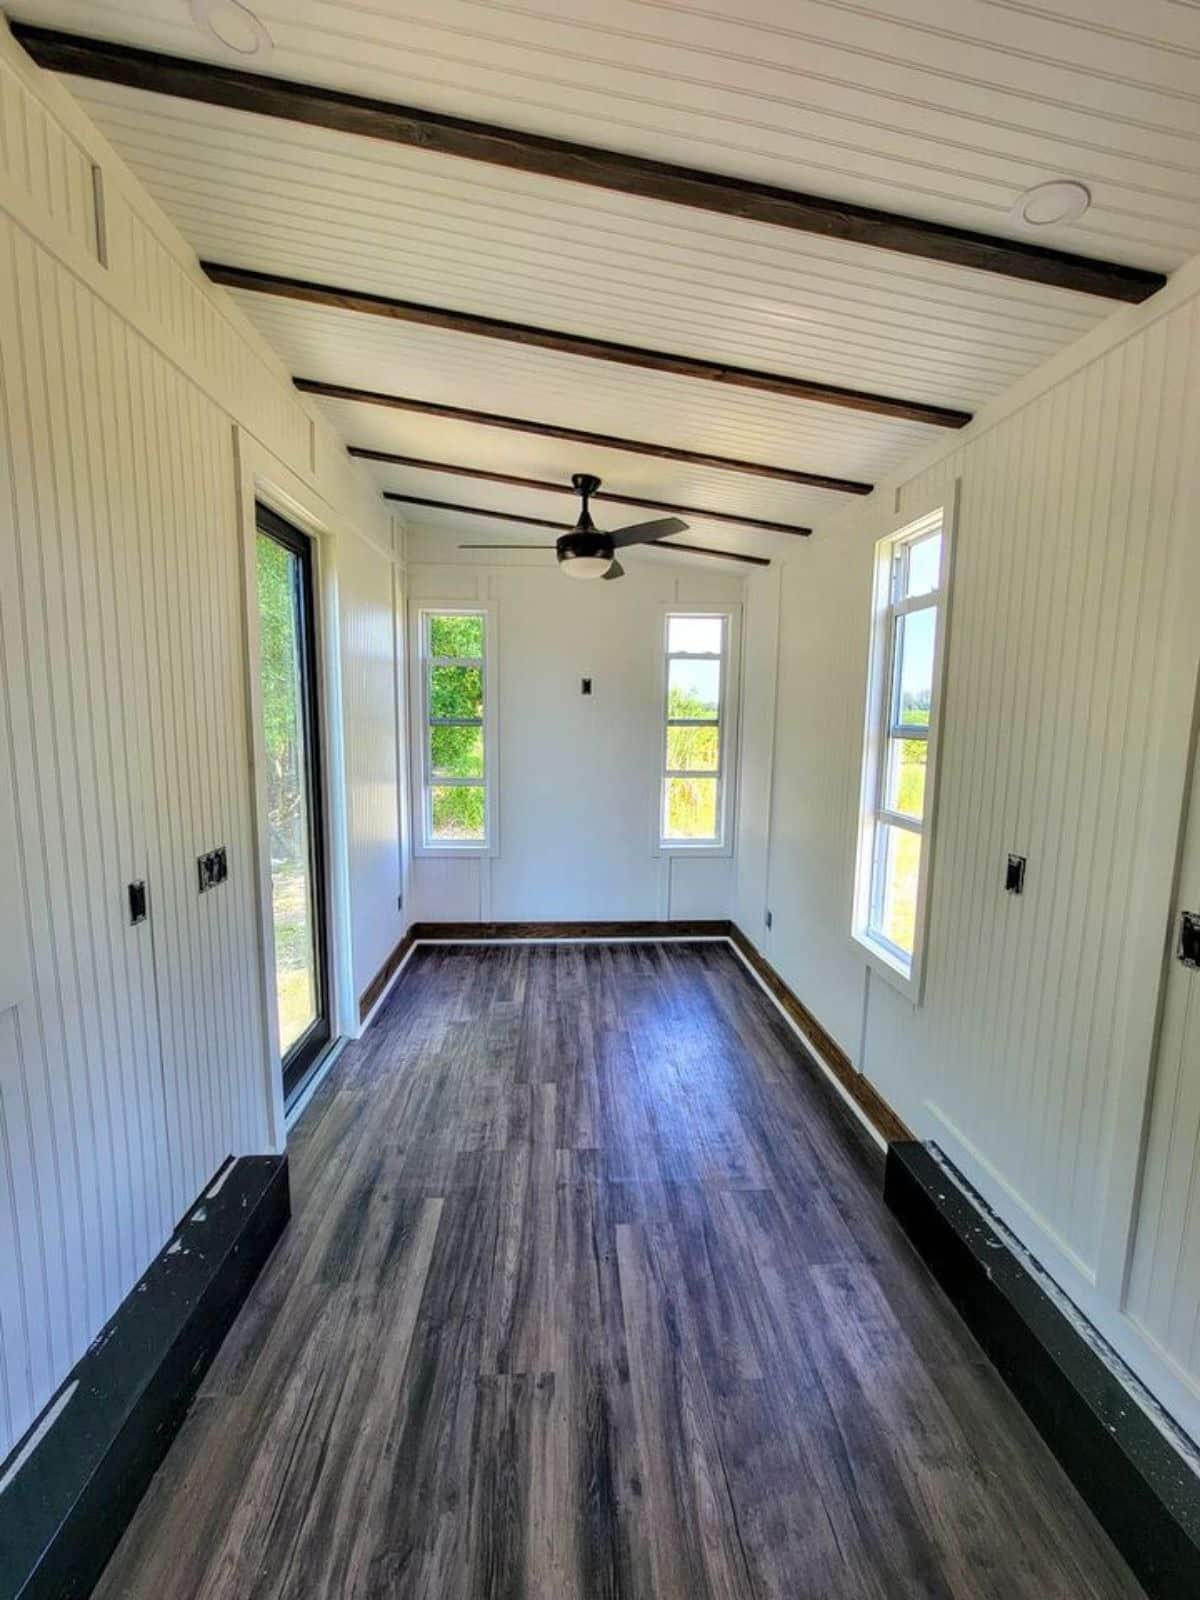 Classic white insulated wooden walls and vinyl flooring all over the house